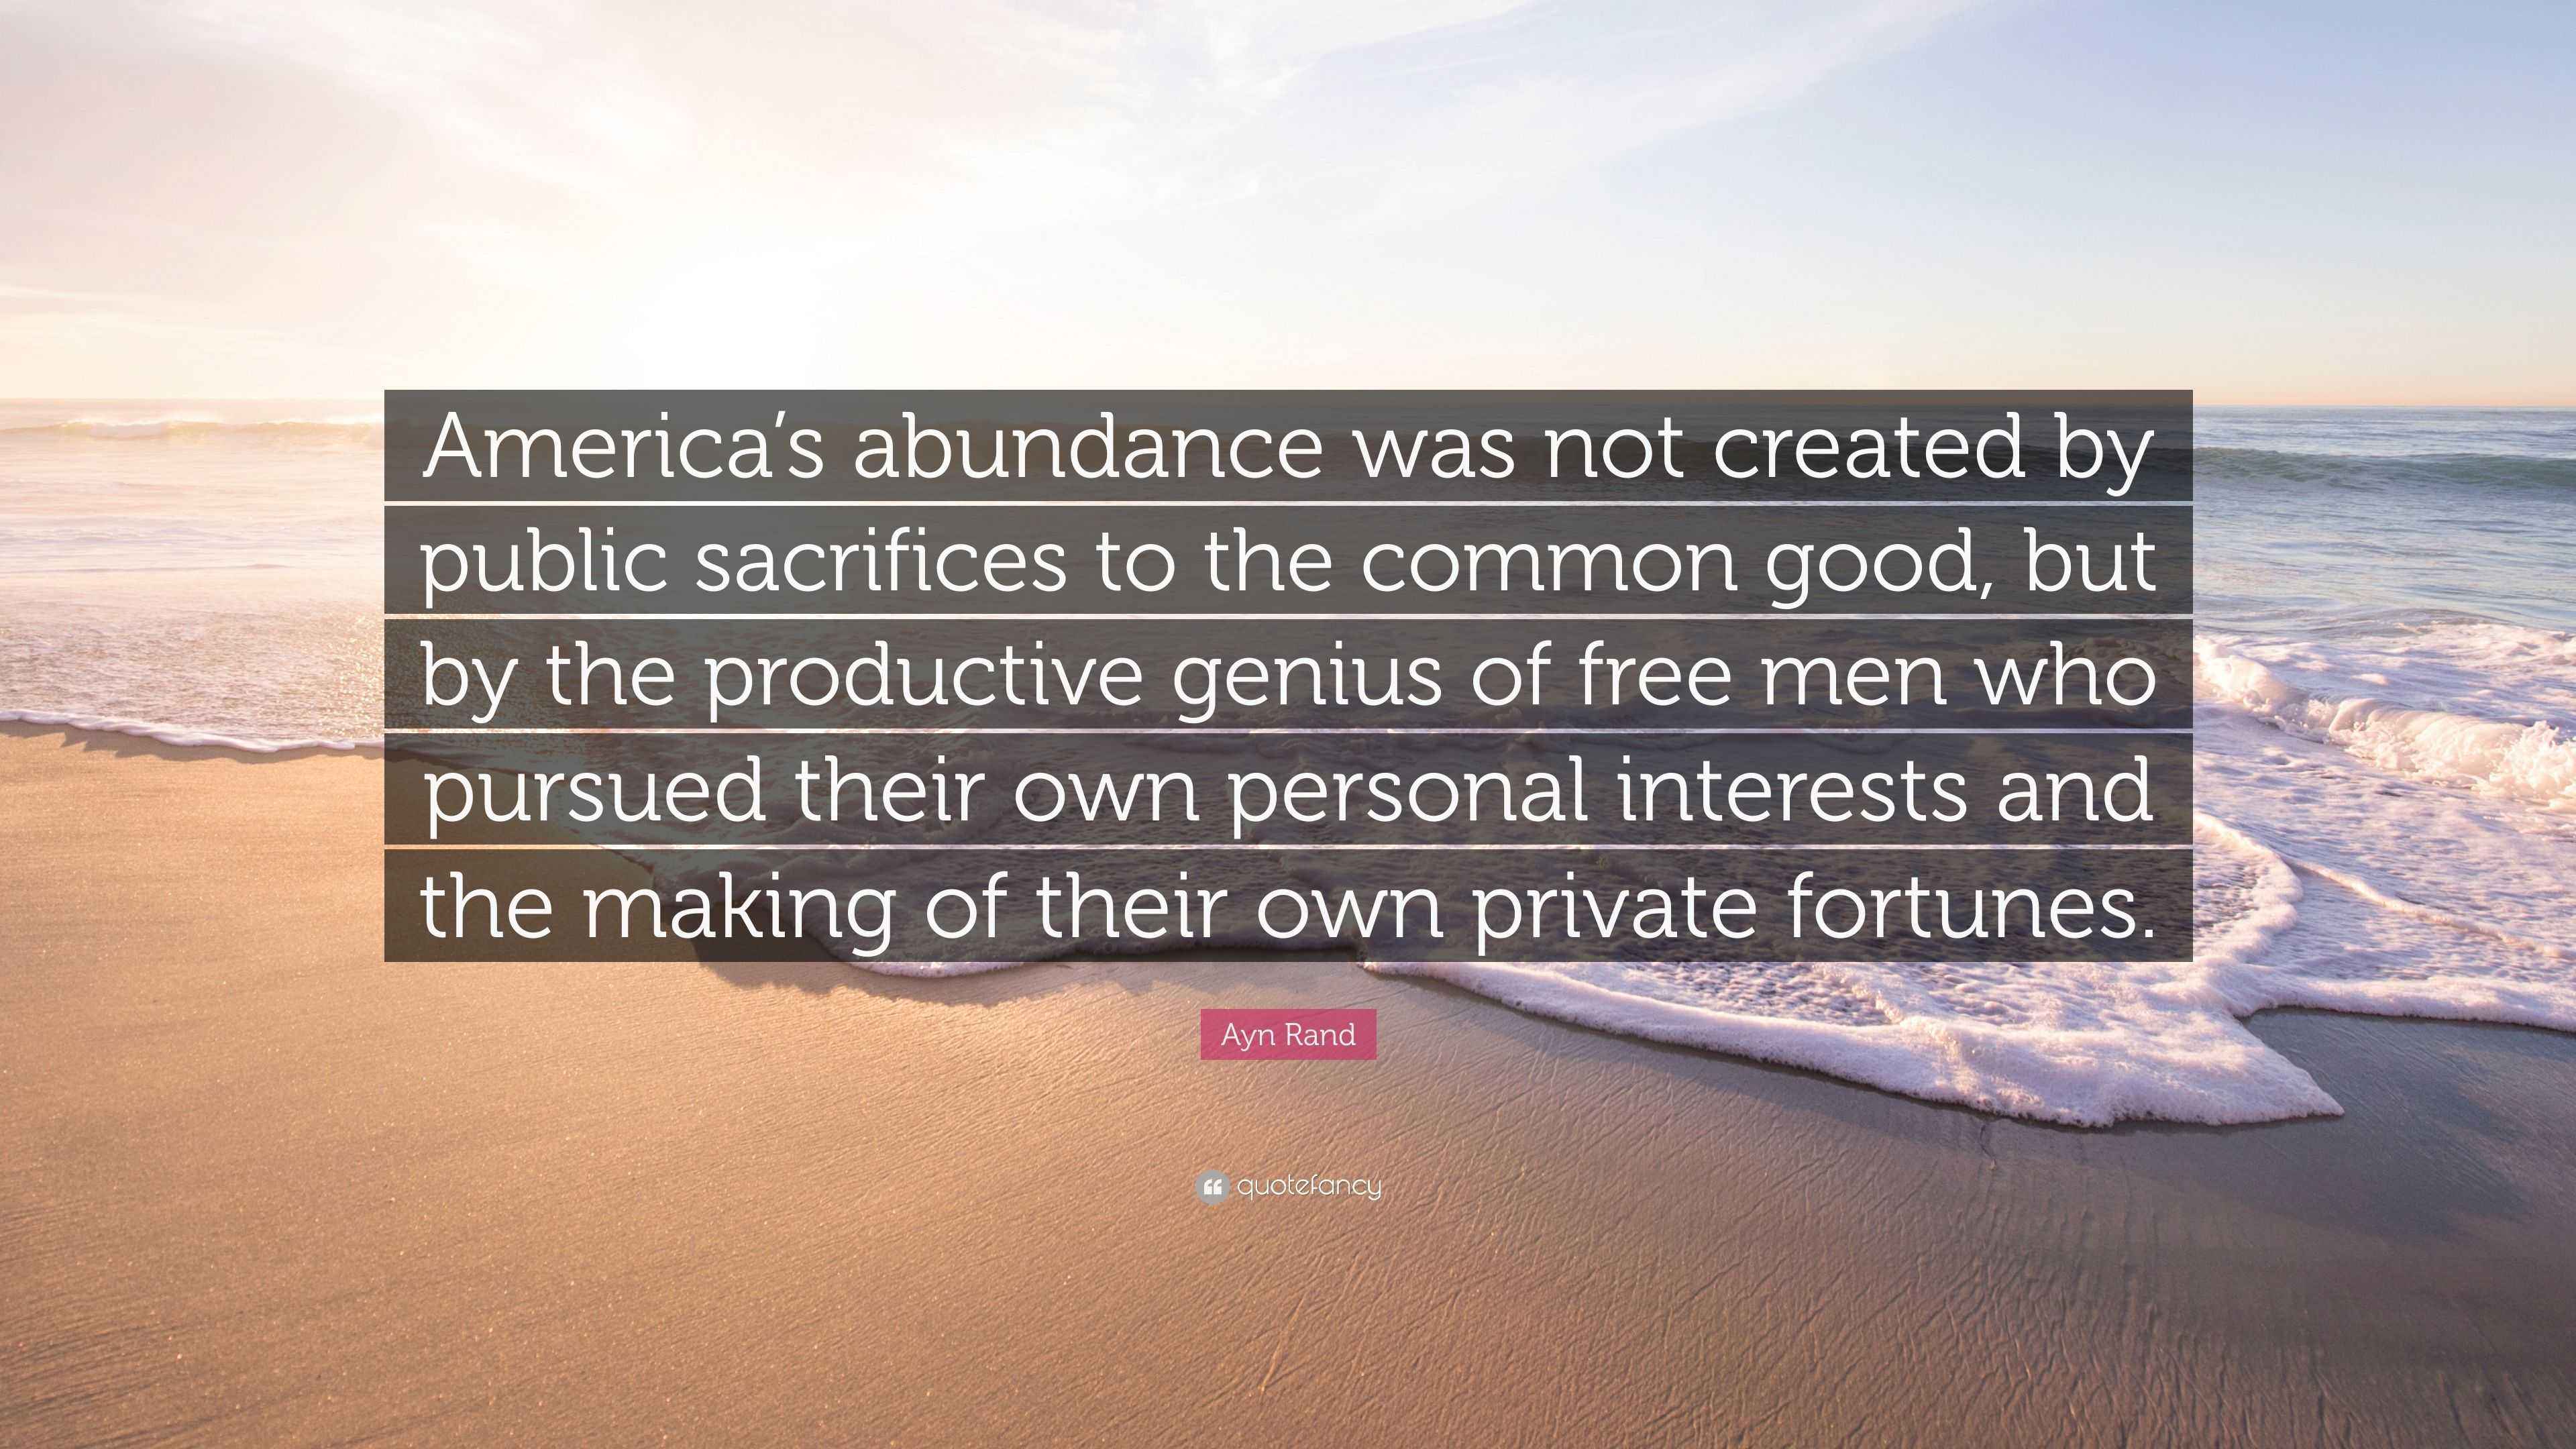 Ayn Rand Quote: “America's abundance was not created by public sacrifices  to the common good, but by the productive genius of free men wh”